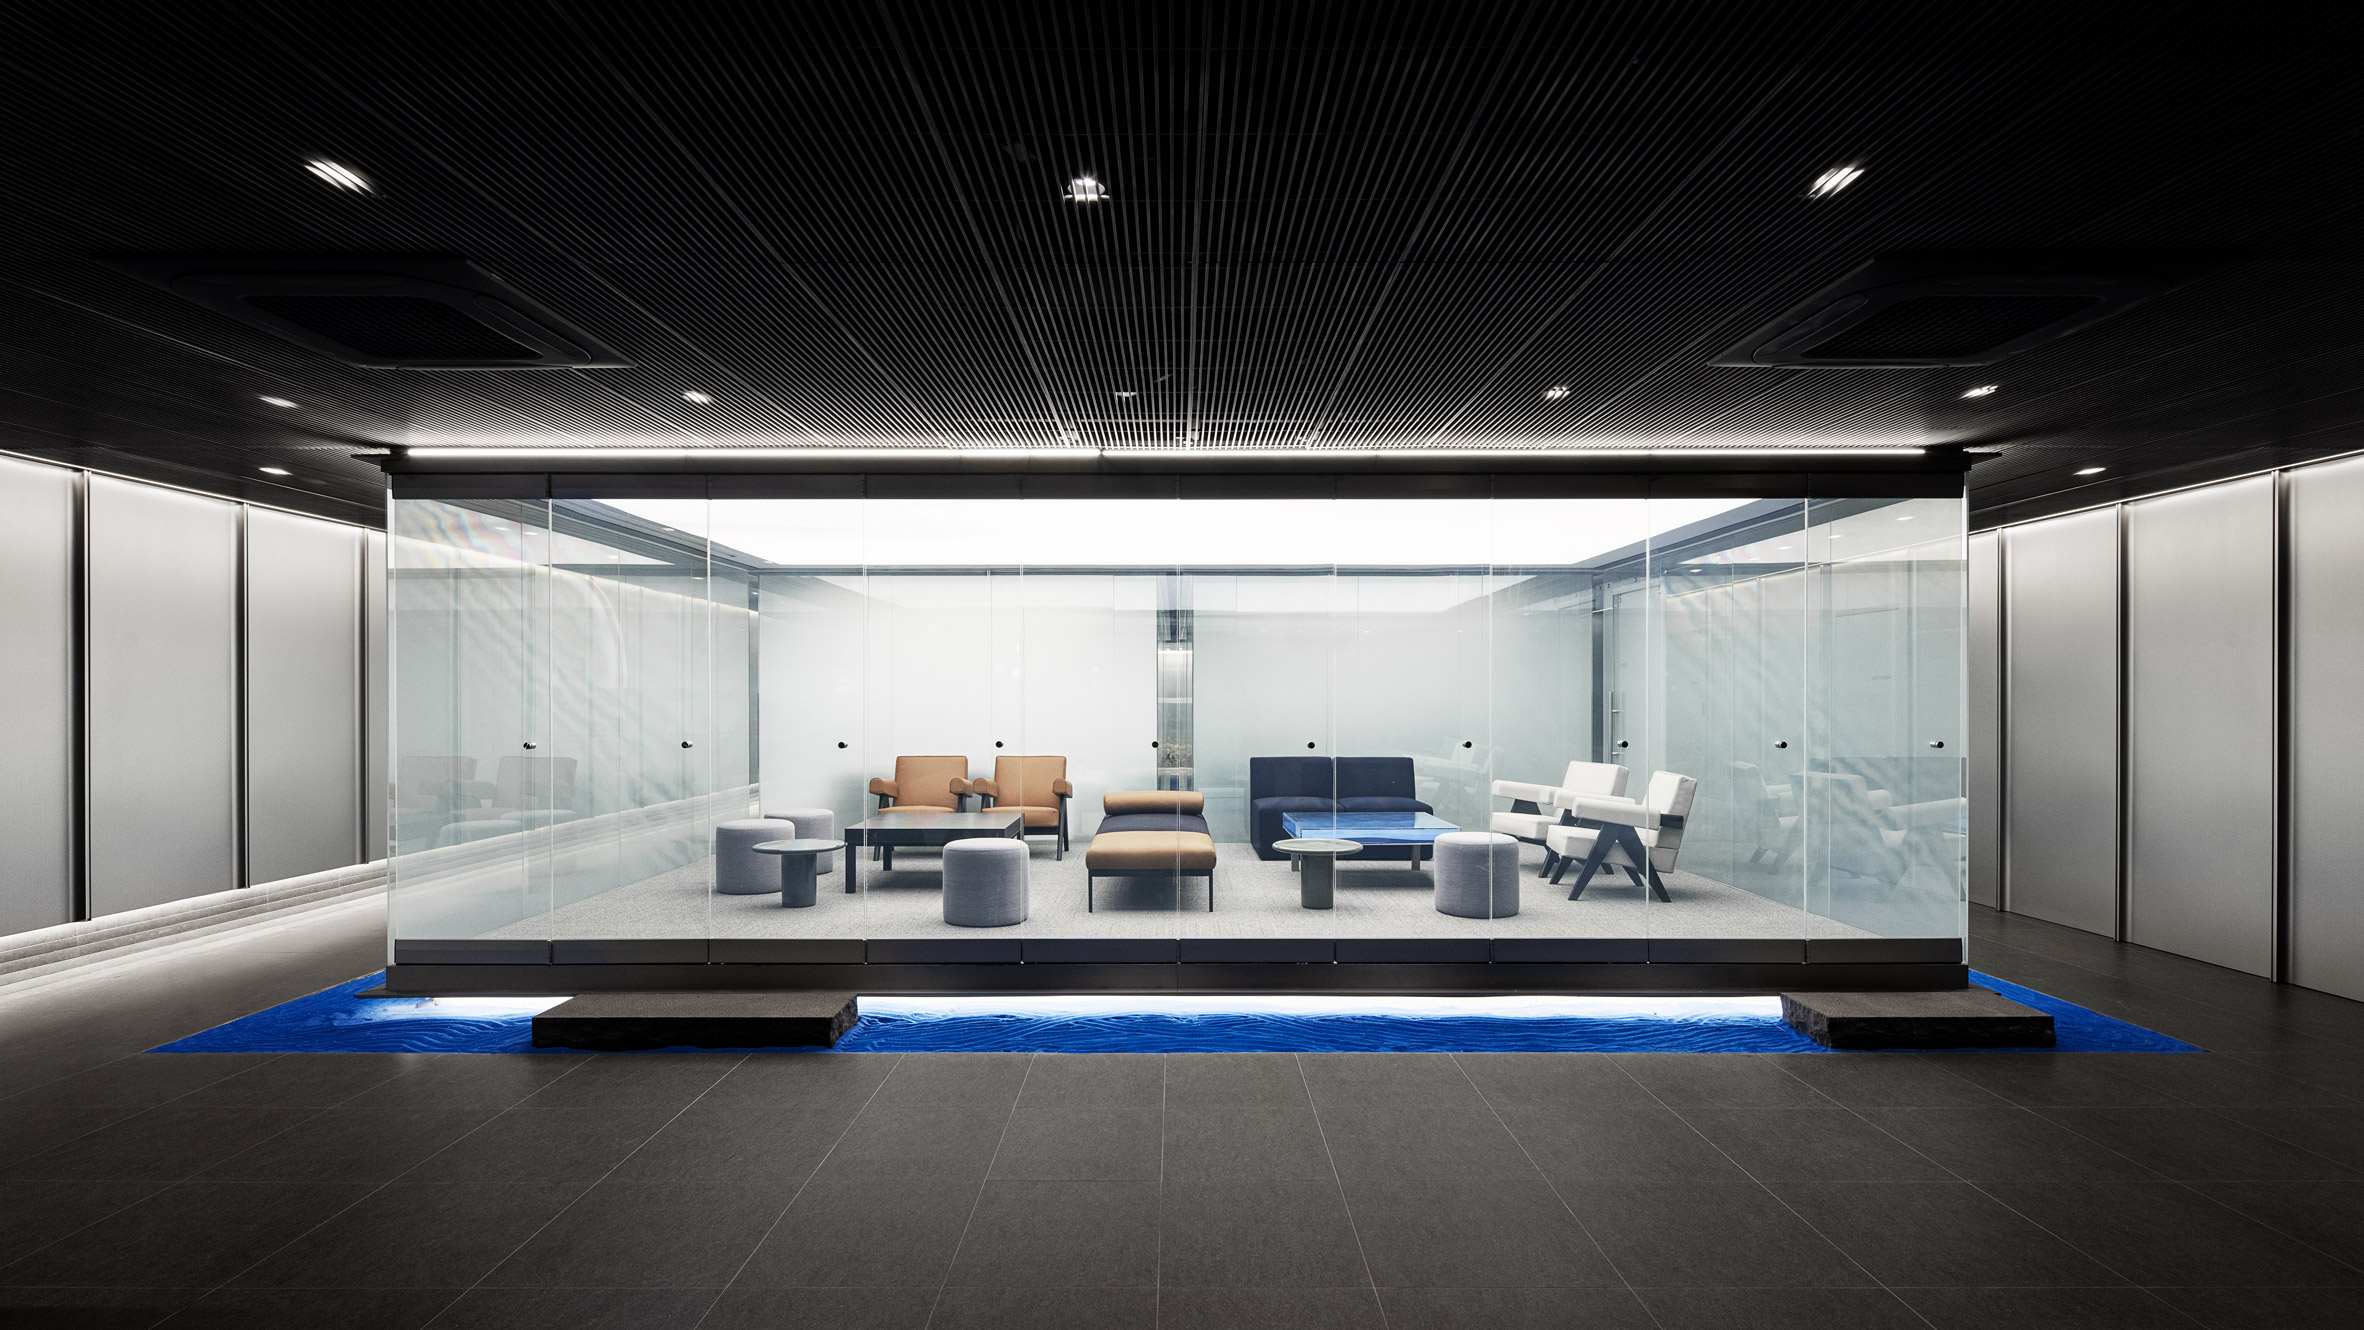 "Floating meeting room" for a Korean bank lounge by Intg